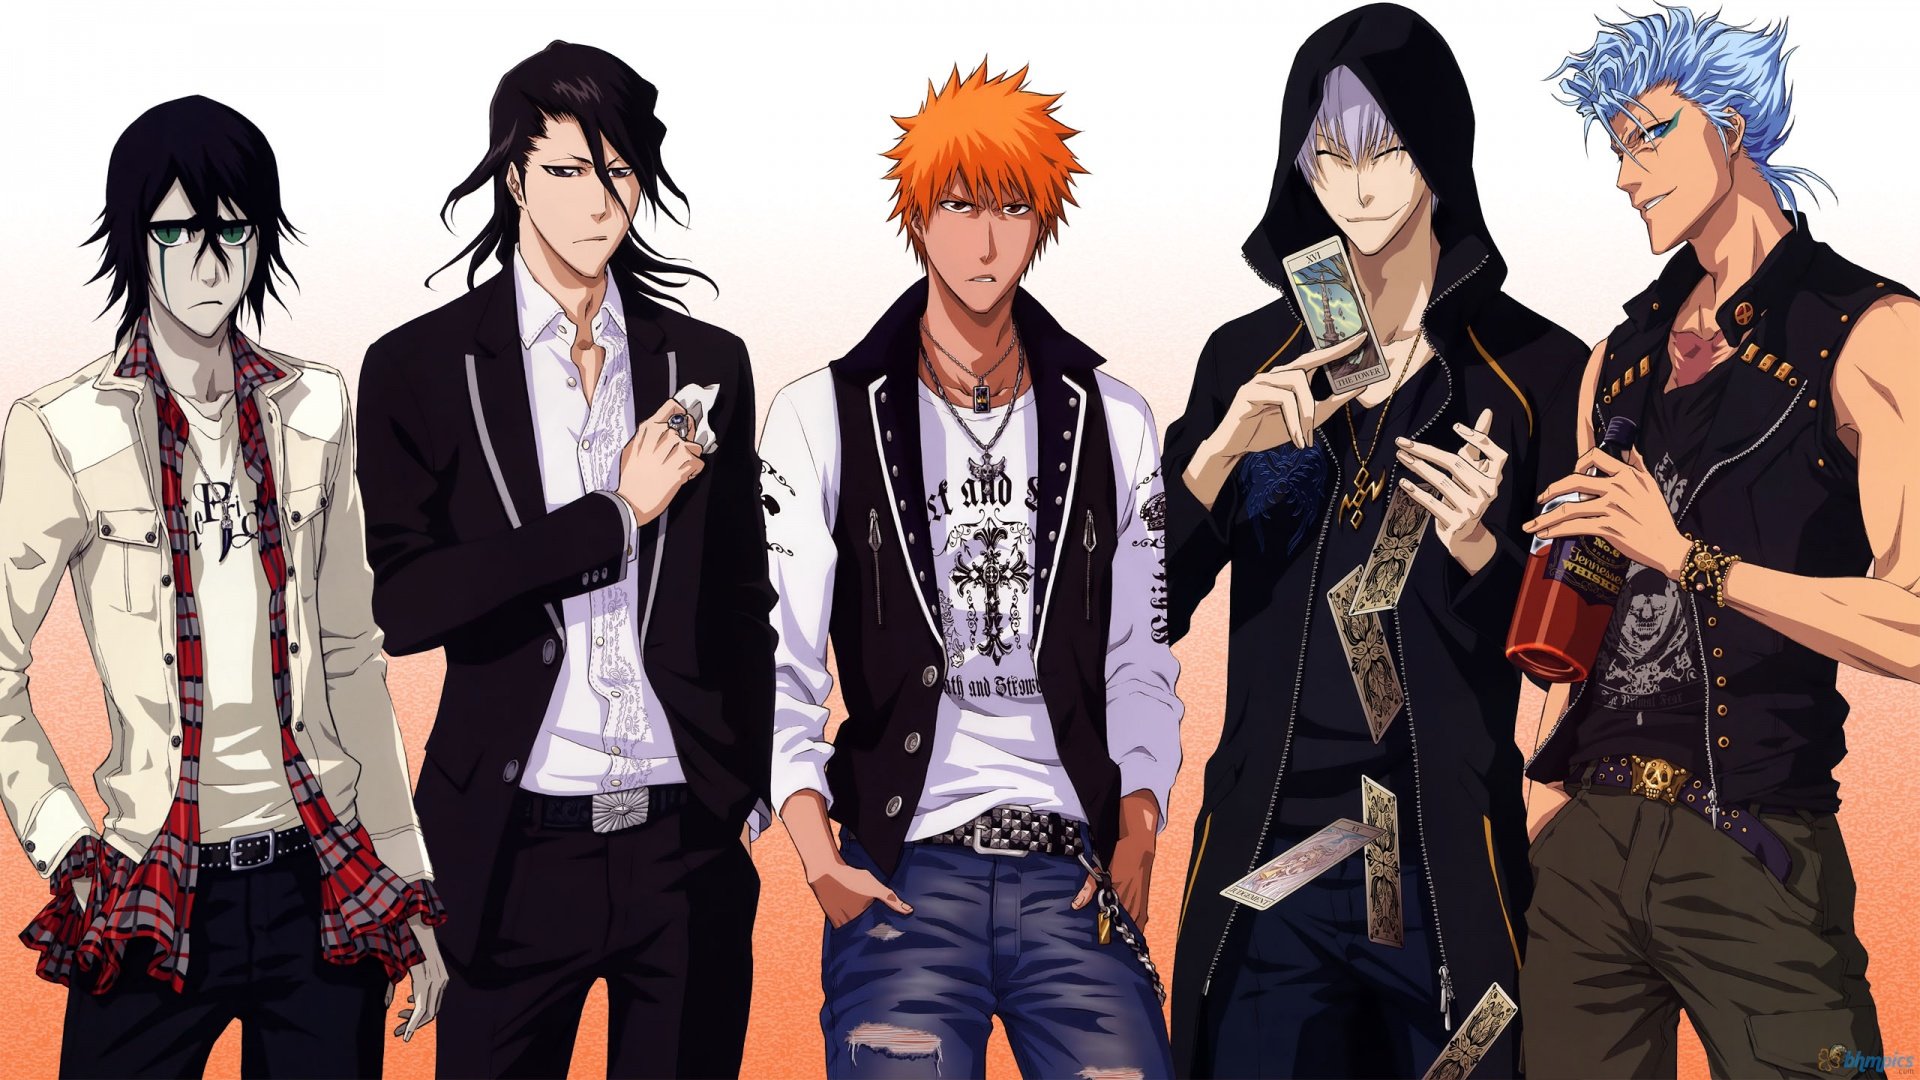 Bleach 4K wallpaper for your desktop or mobile screen free and easy to download